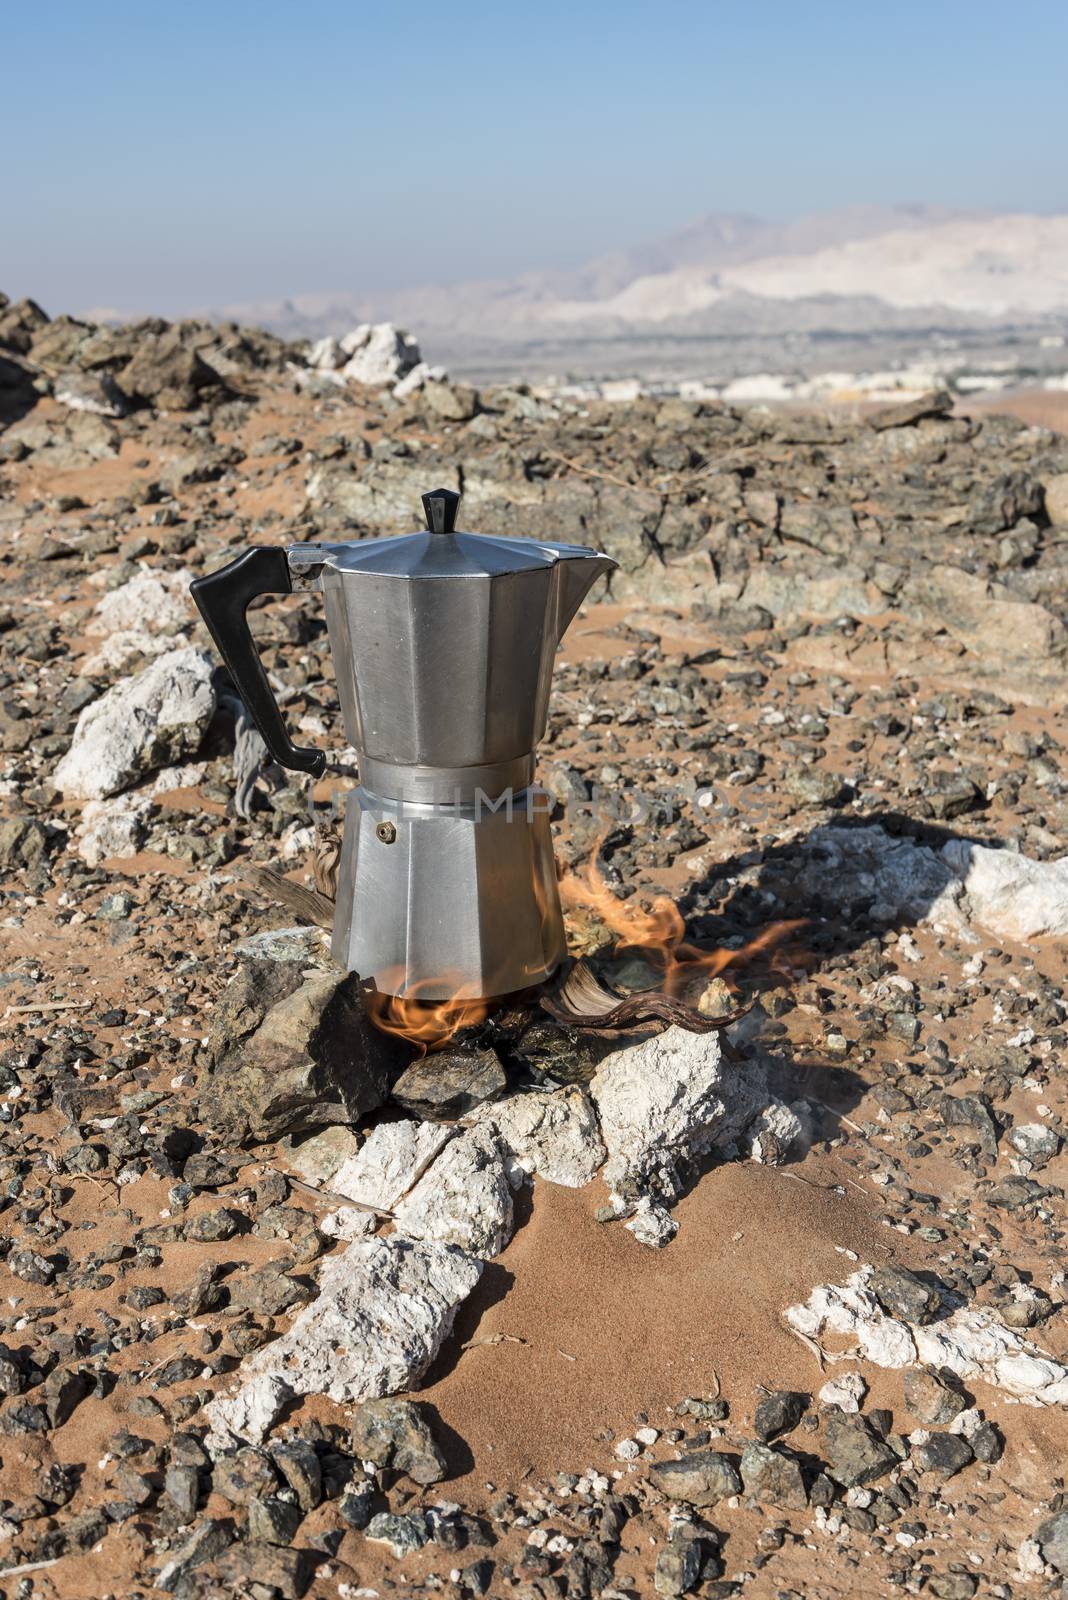 Italian Coffee maker at a fireplace in the desert by GABIS